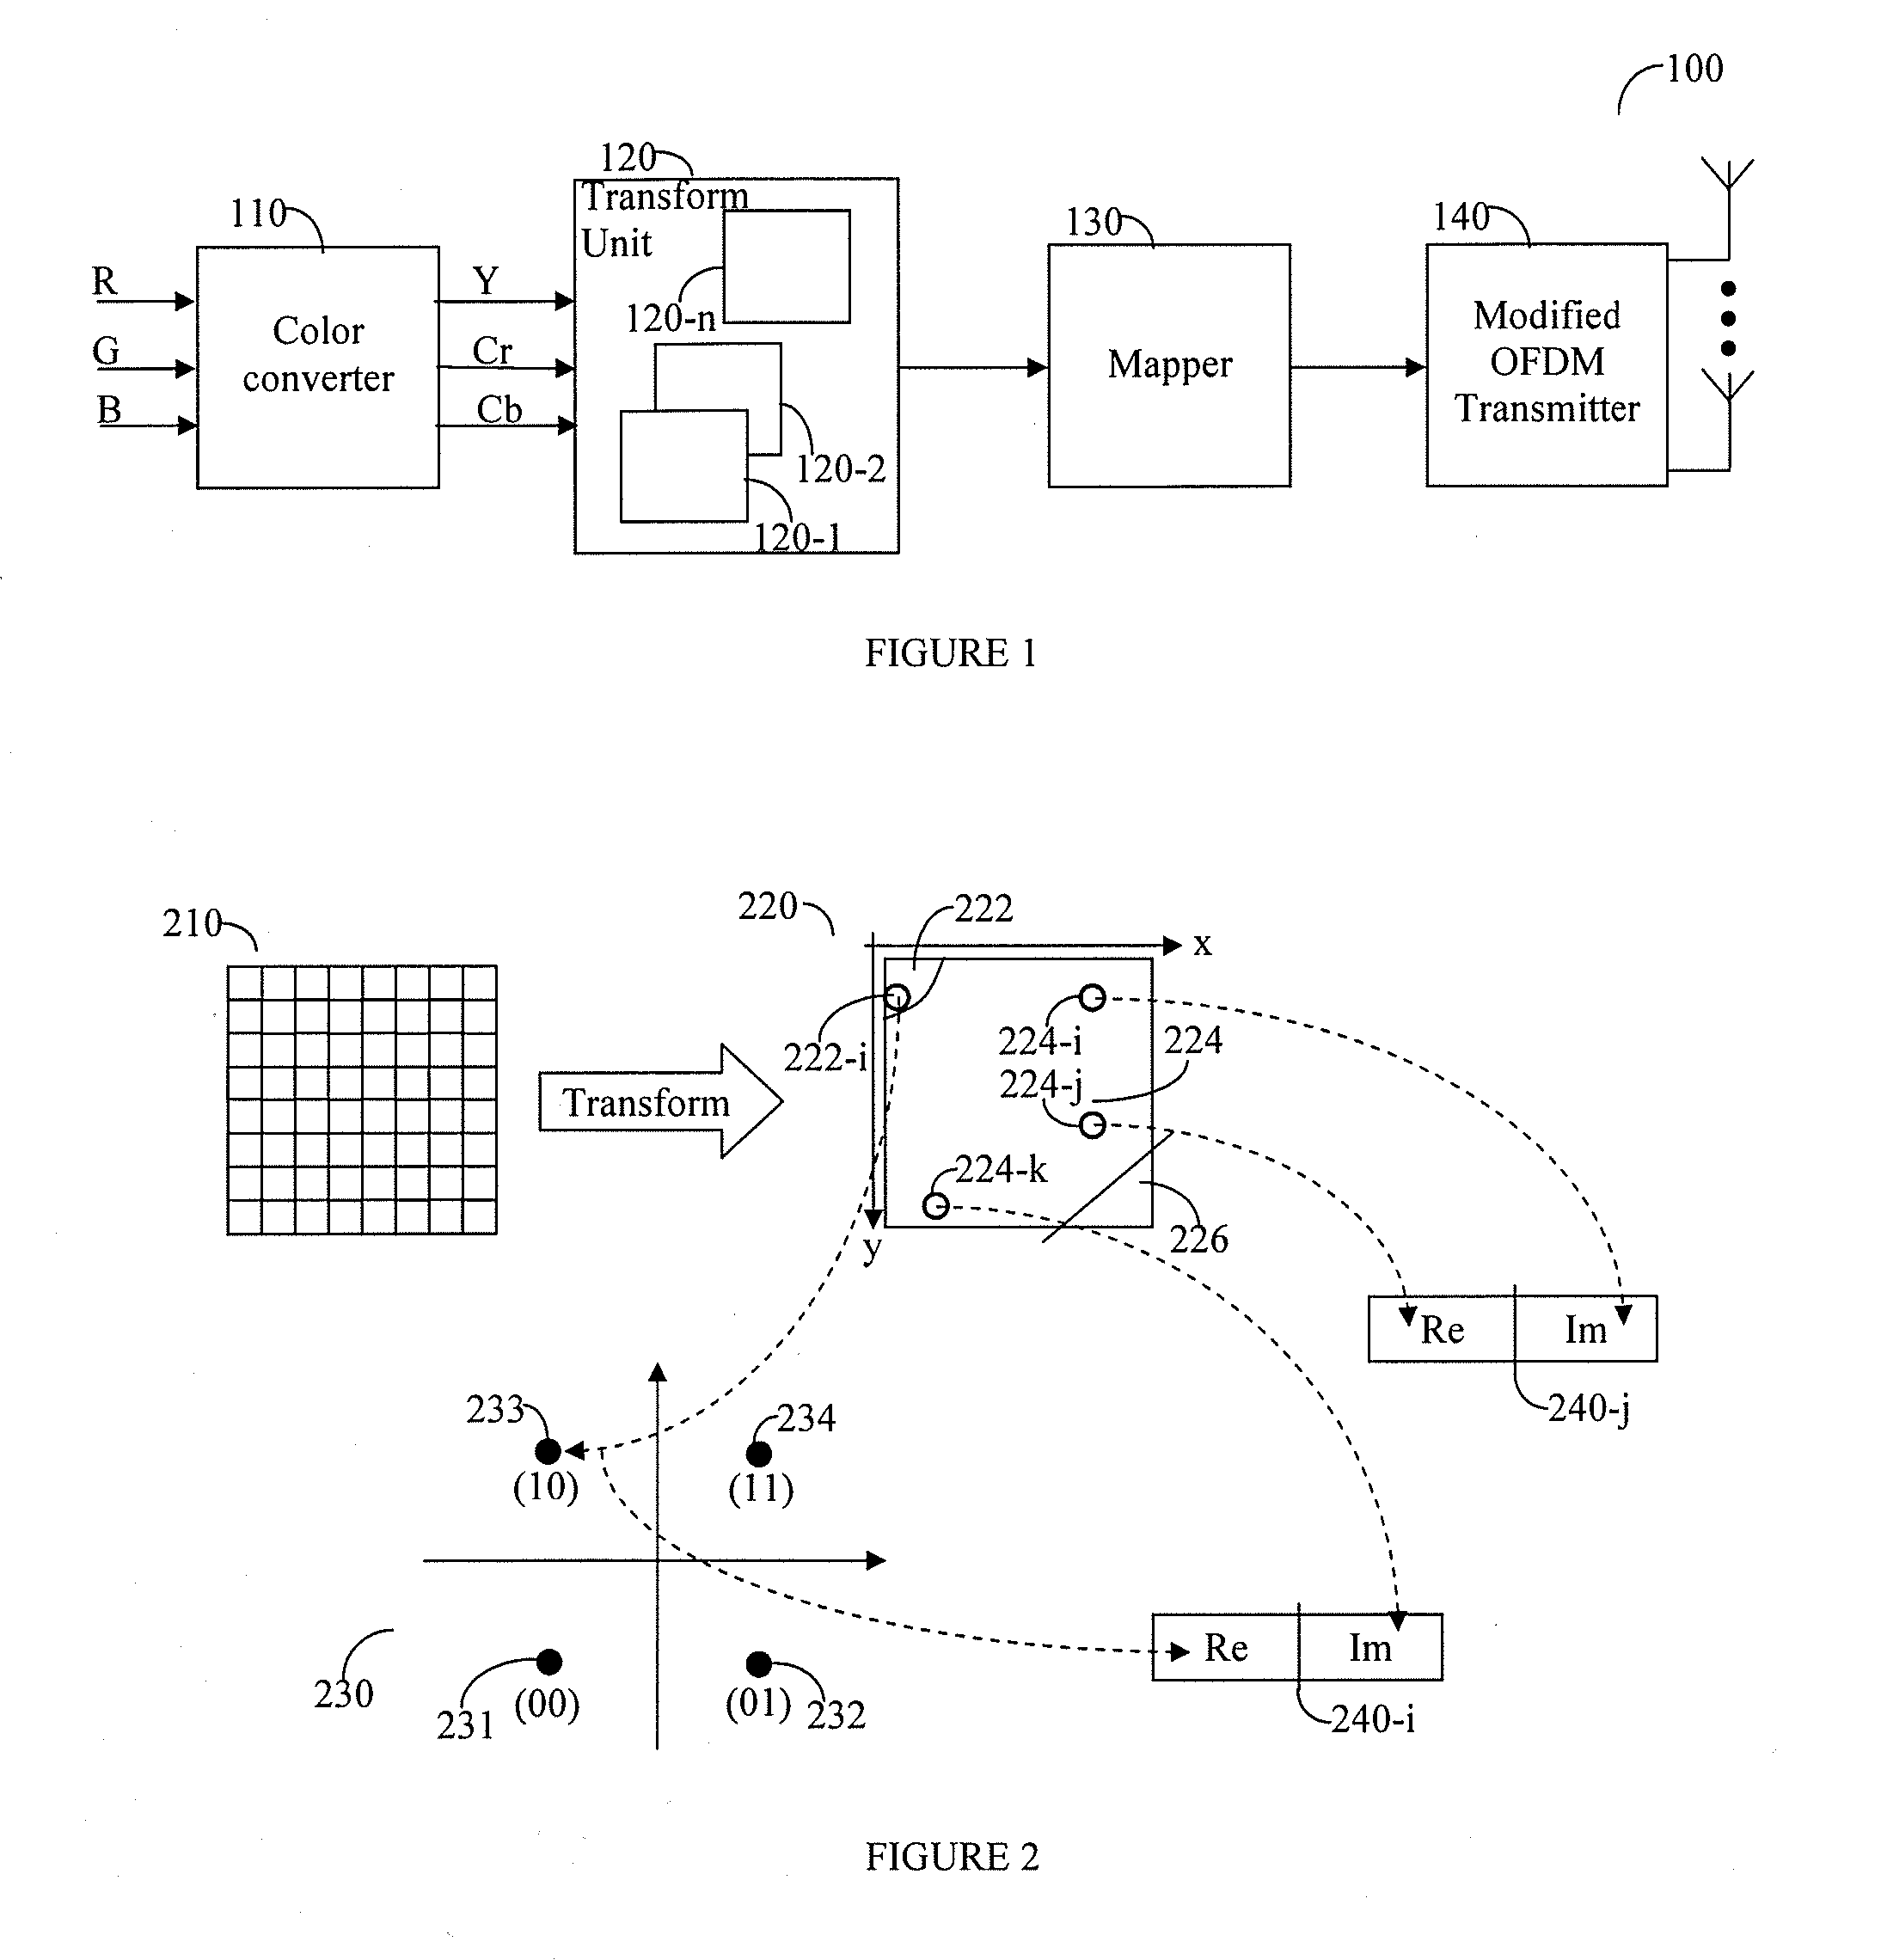 Apparatus for enhanced wireless transmission and reception of uncompressed video